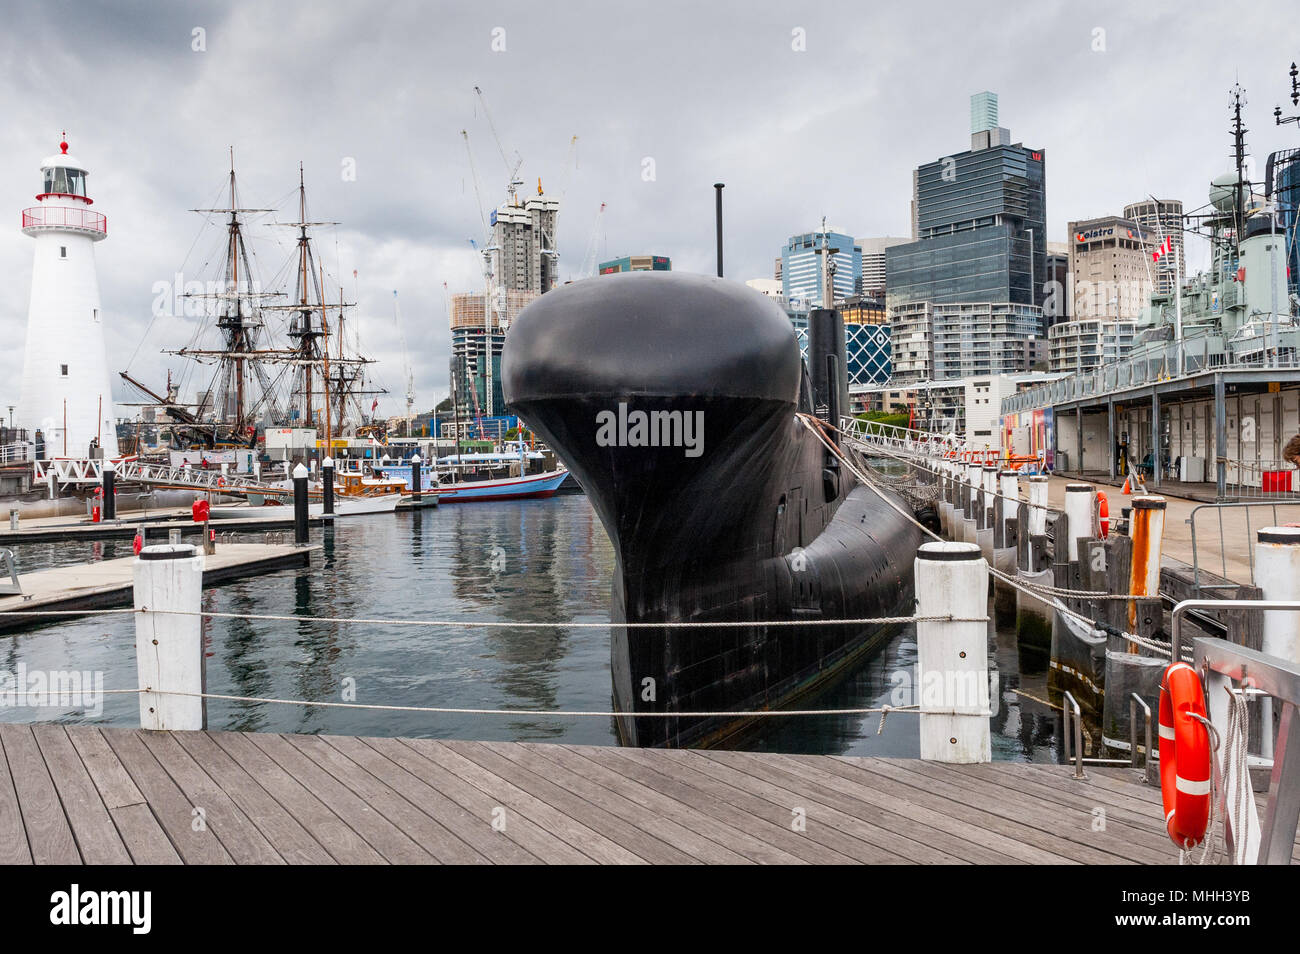 Views of a naval submarine moored at Darling Harbour in Sydney New South Wales, Australia. Stock Photo